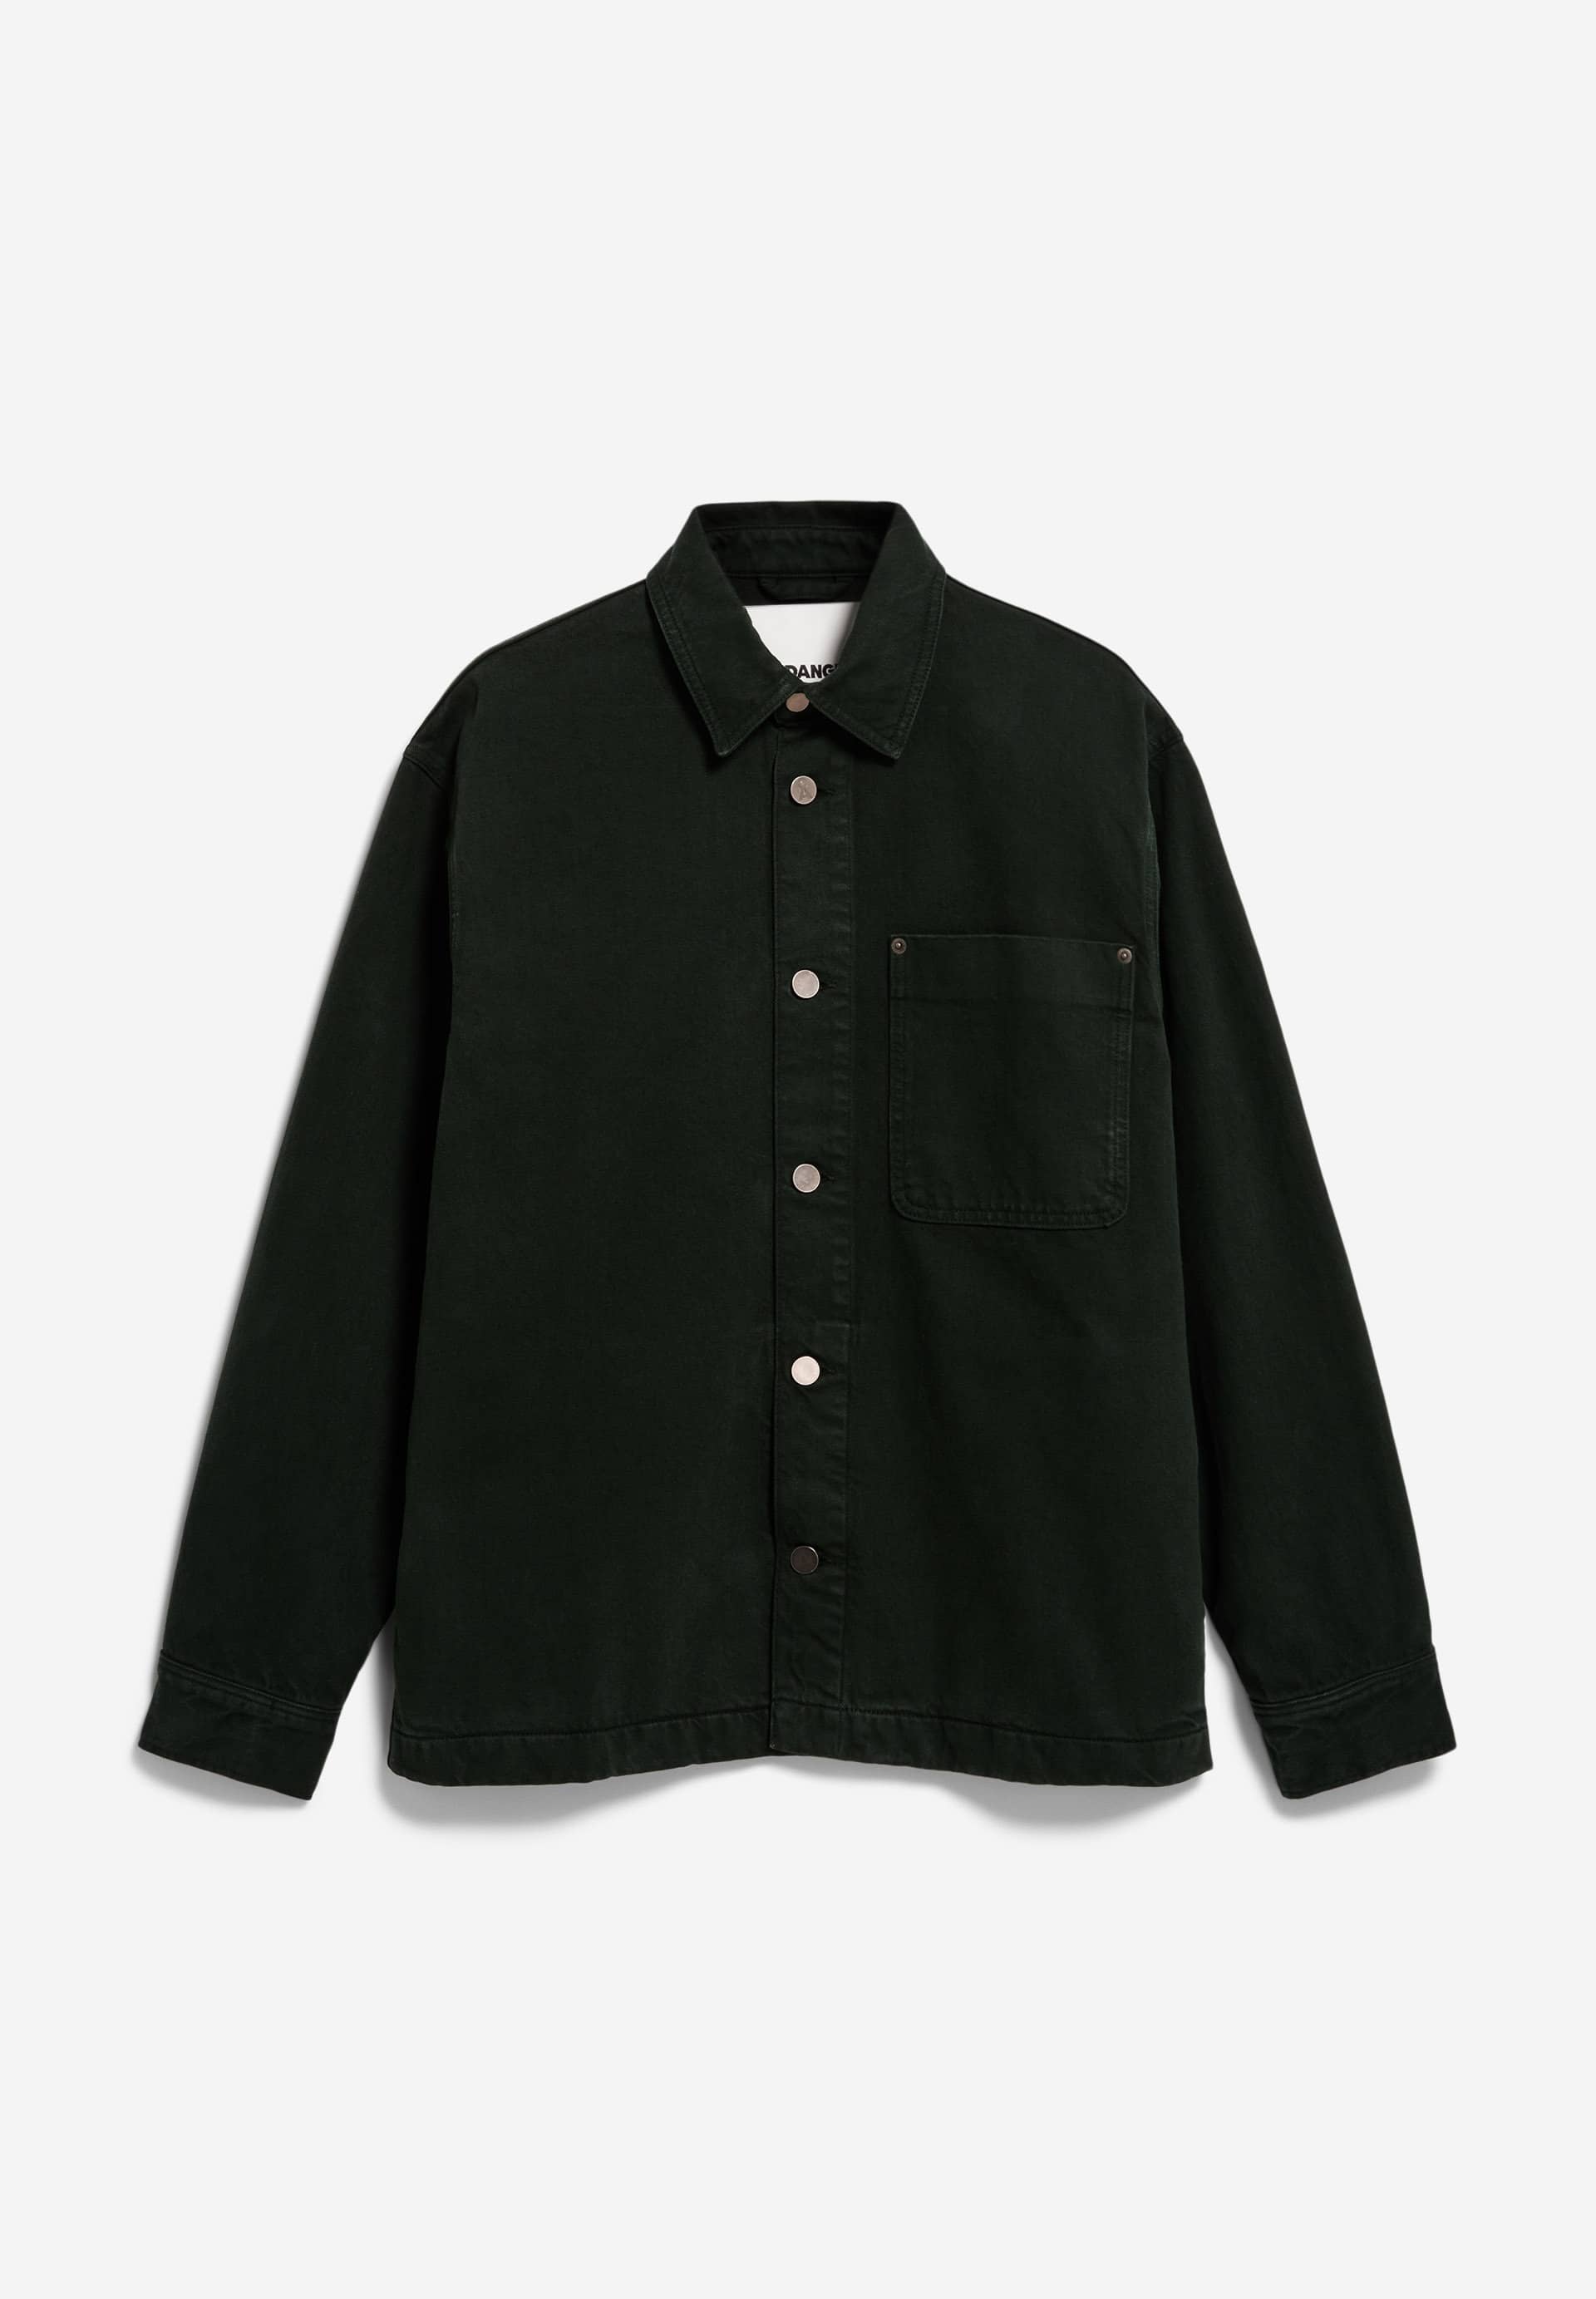 BAASIO GMT DYE Overshirt Relaxed Fit aus recycelter Baumwolle